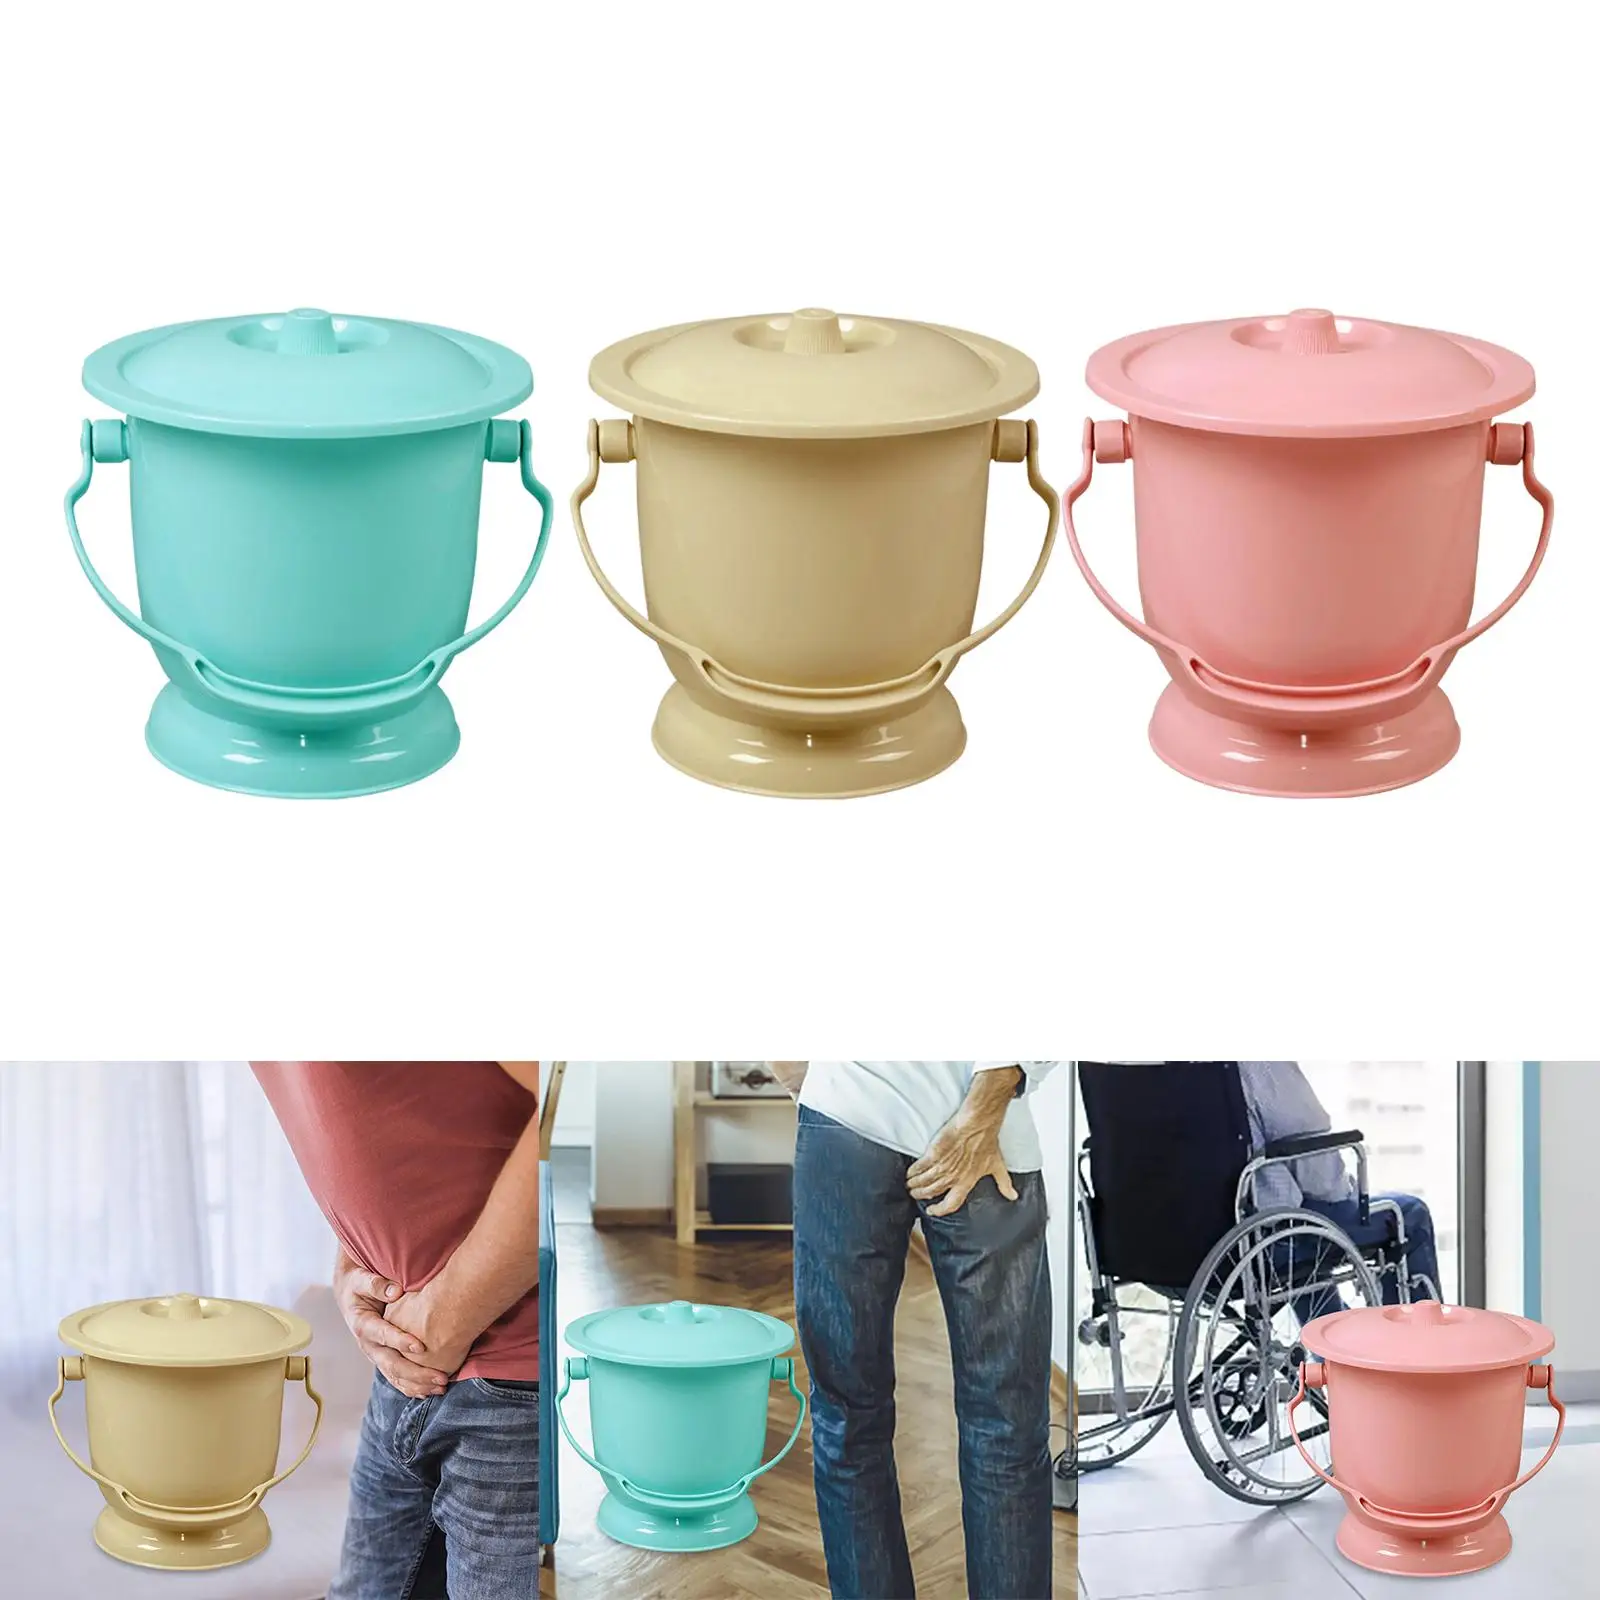 Chamber Pot with Lid Spittoon Bedpan Children Adults Practical Urine Pot